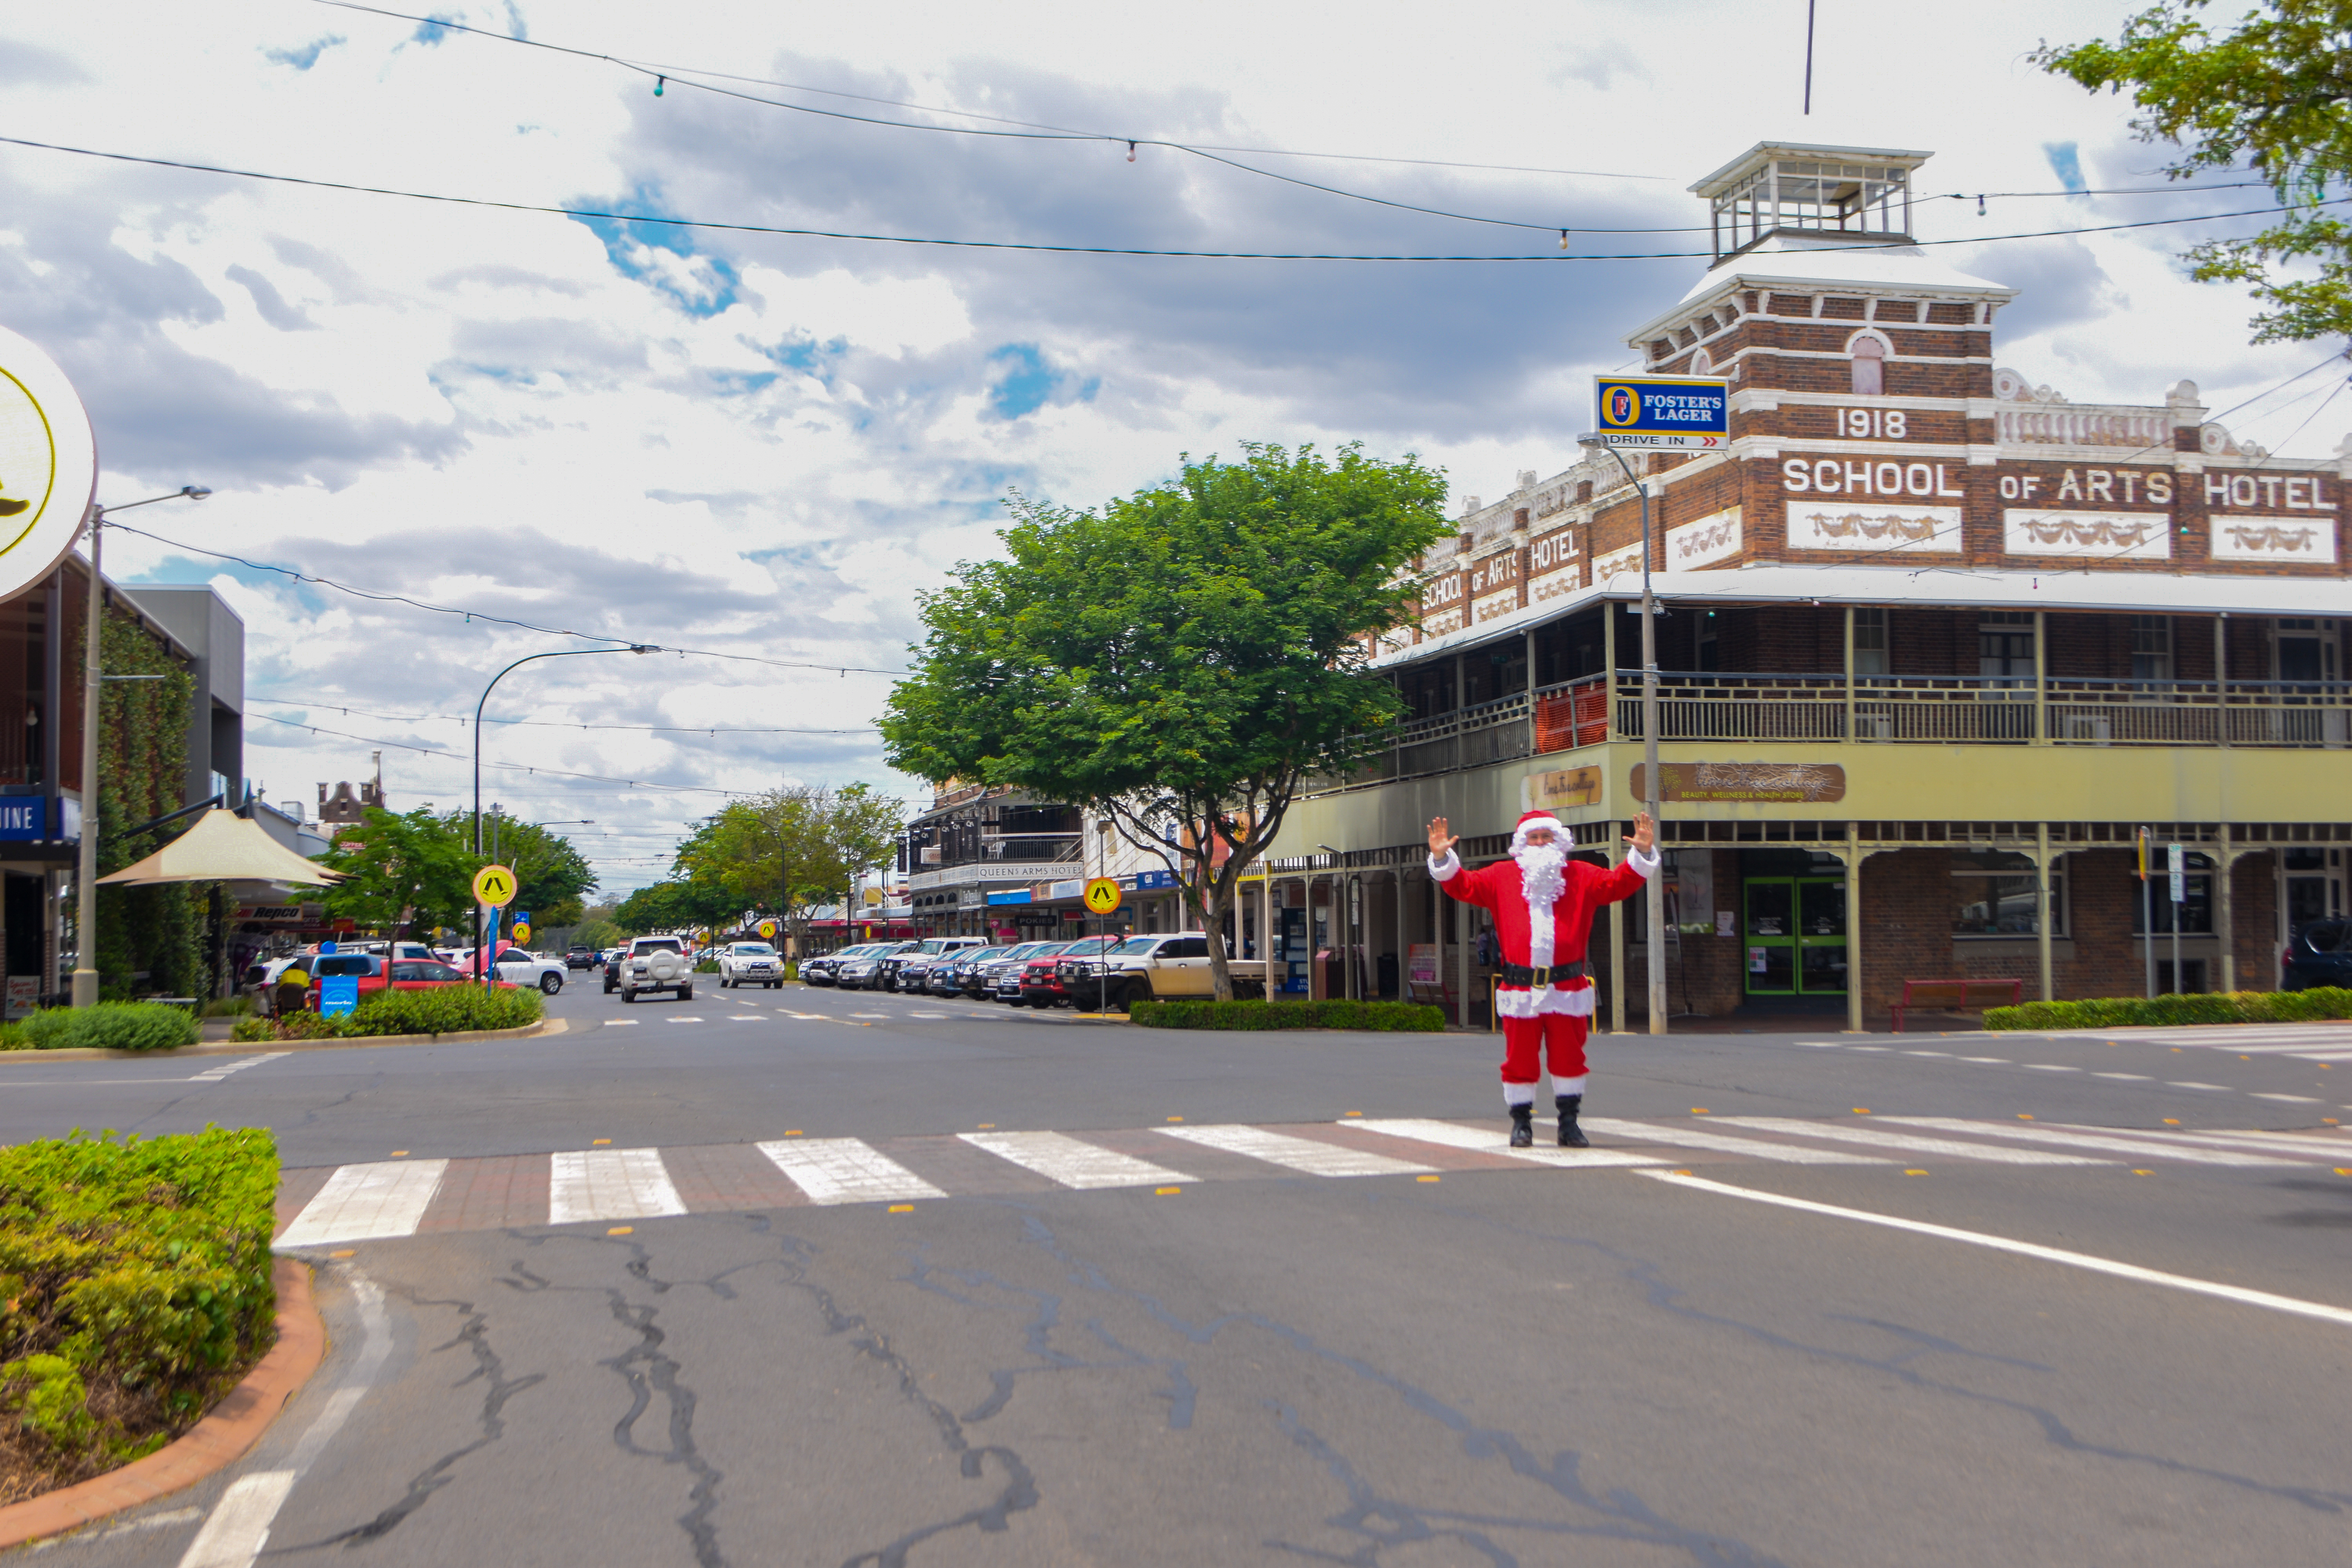 Santa is excited to welcome you to the maranoa christmas street party 1